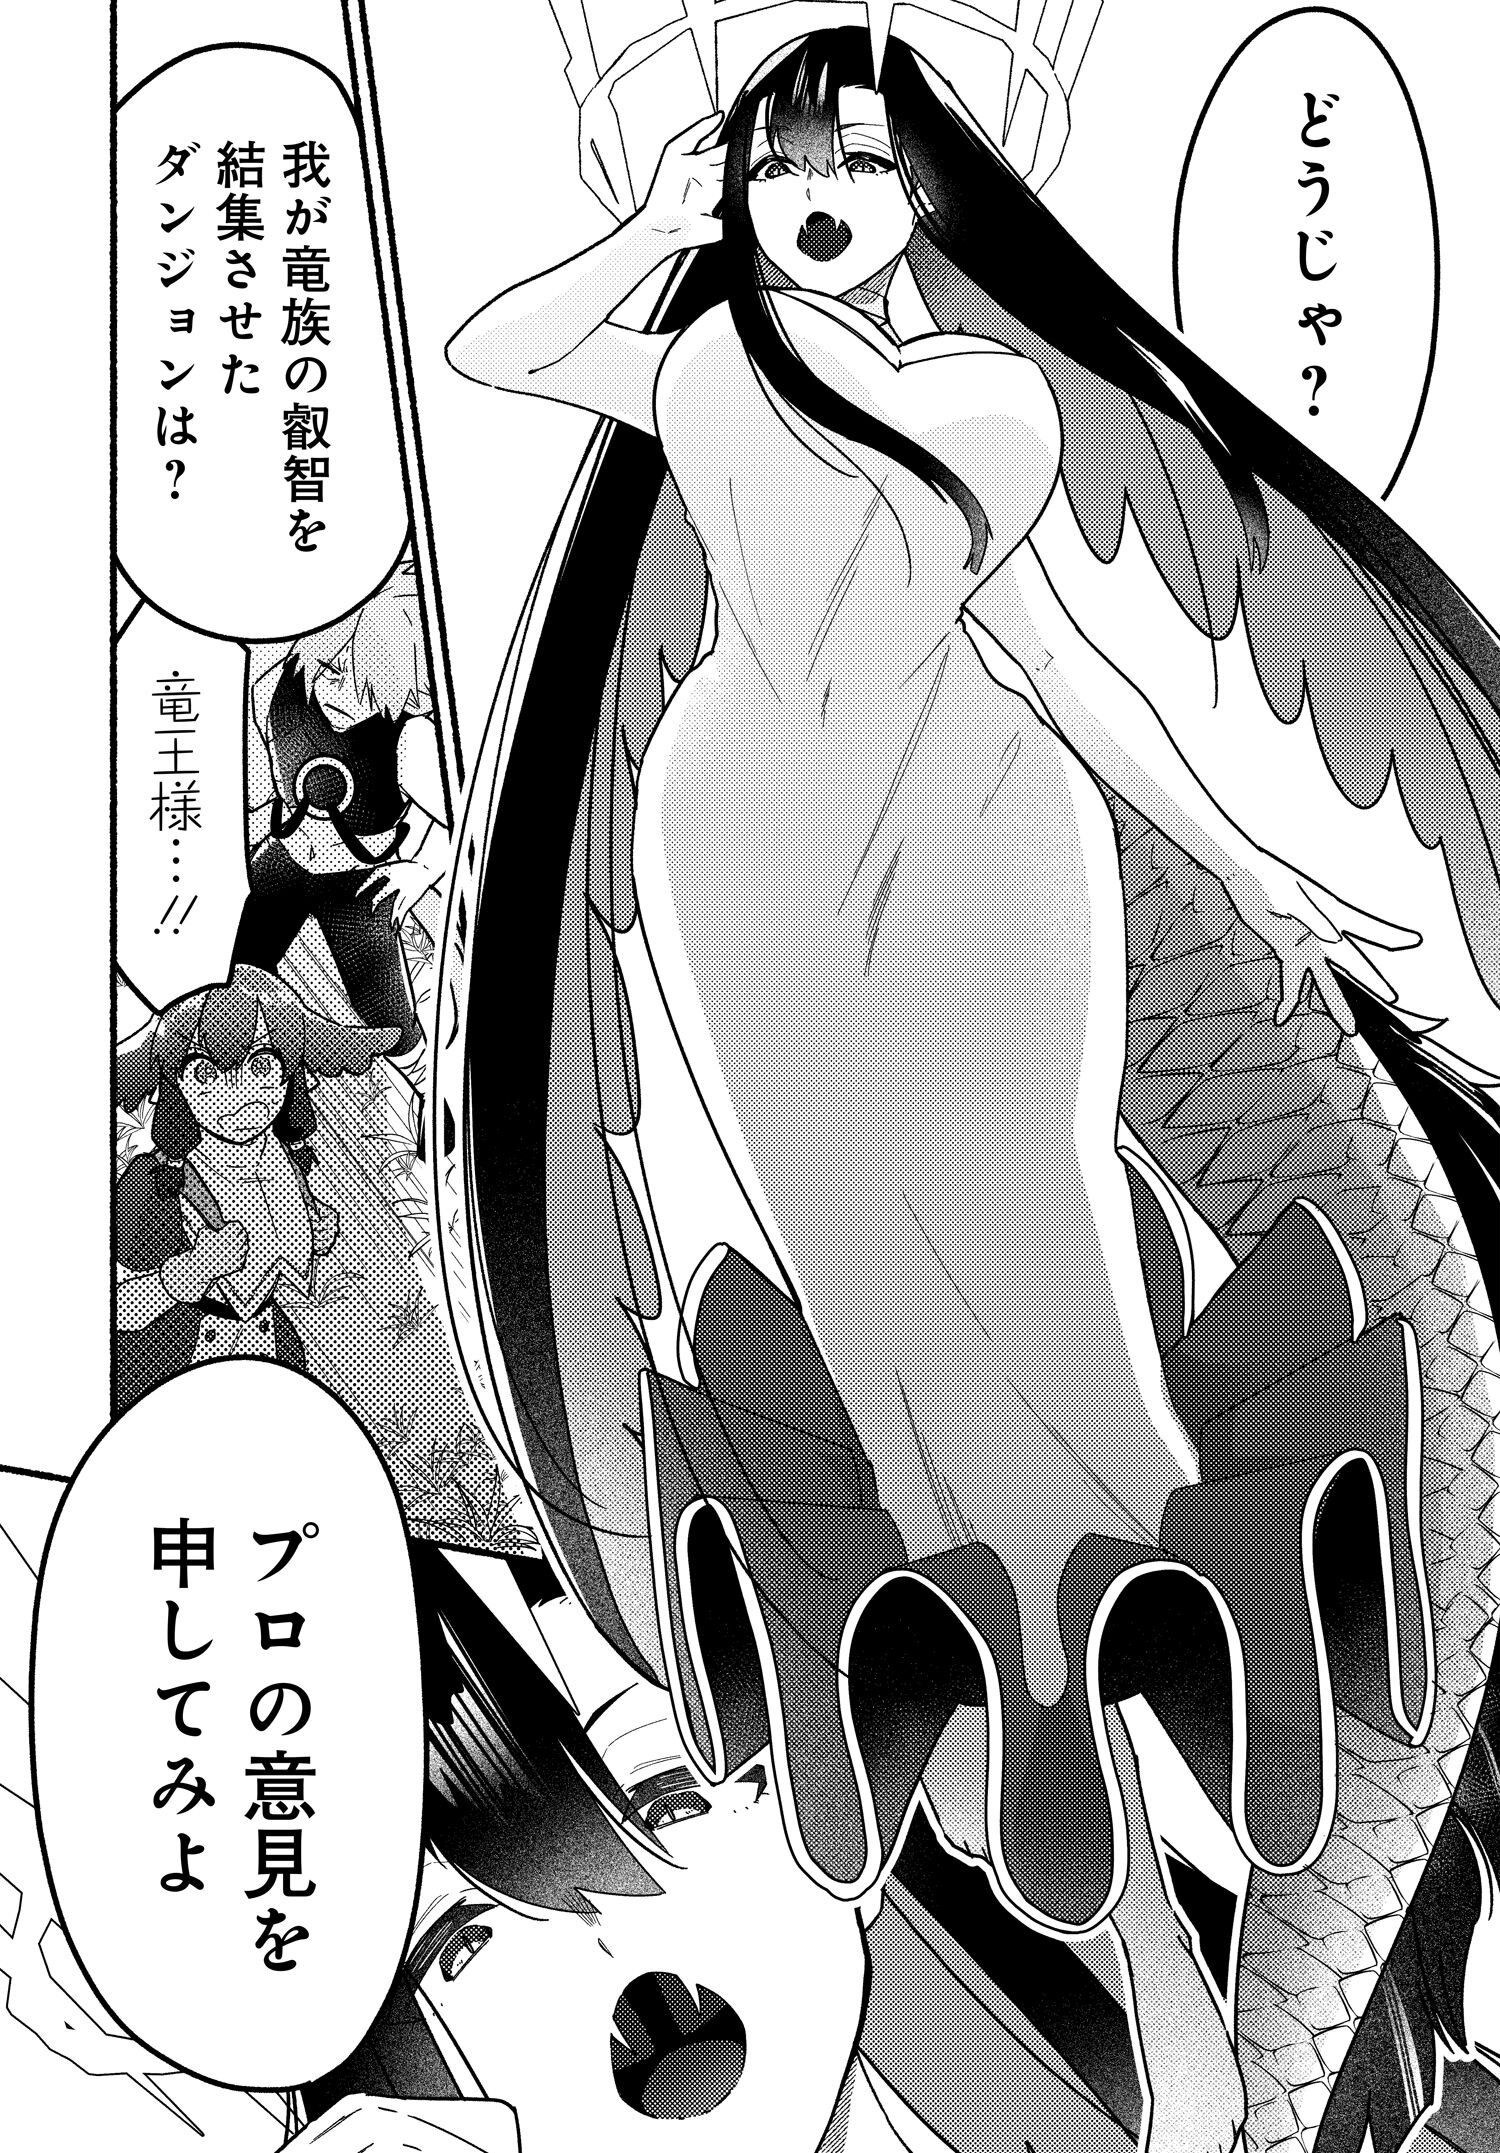 Shougyou Dungeon to Slime Maou - Chapter 3.1 - Page 4